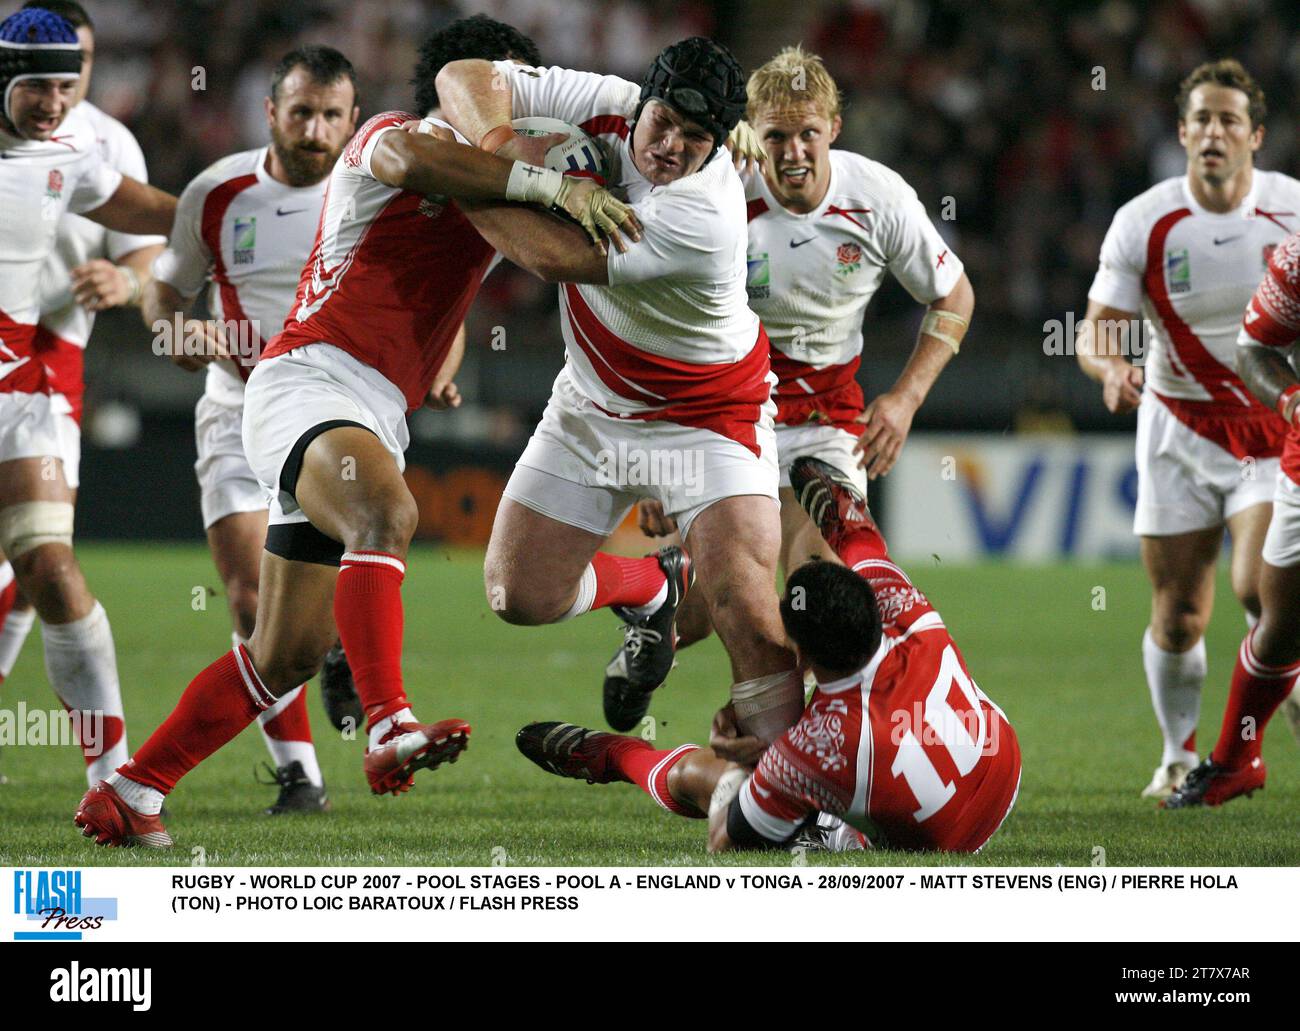 RUGBY - WORLD CUP 2007 - POOL STAGES - POOL A - ENGLAND v TONGA - 28/09/2007 - MATT STEVENS (ENG) / PIERRE HOLA (TON) - PHOTO LOIC BARATOUX / FLASH PRESS Stock Photo